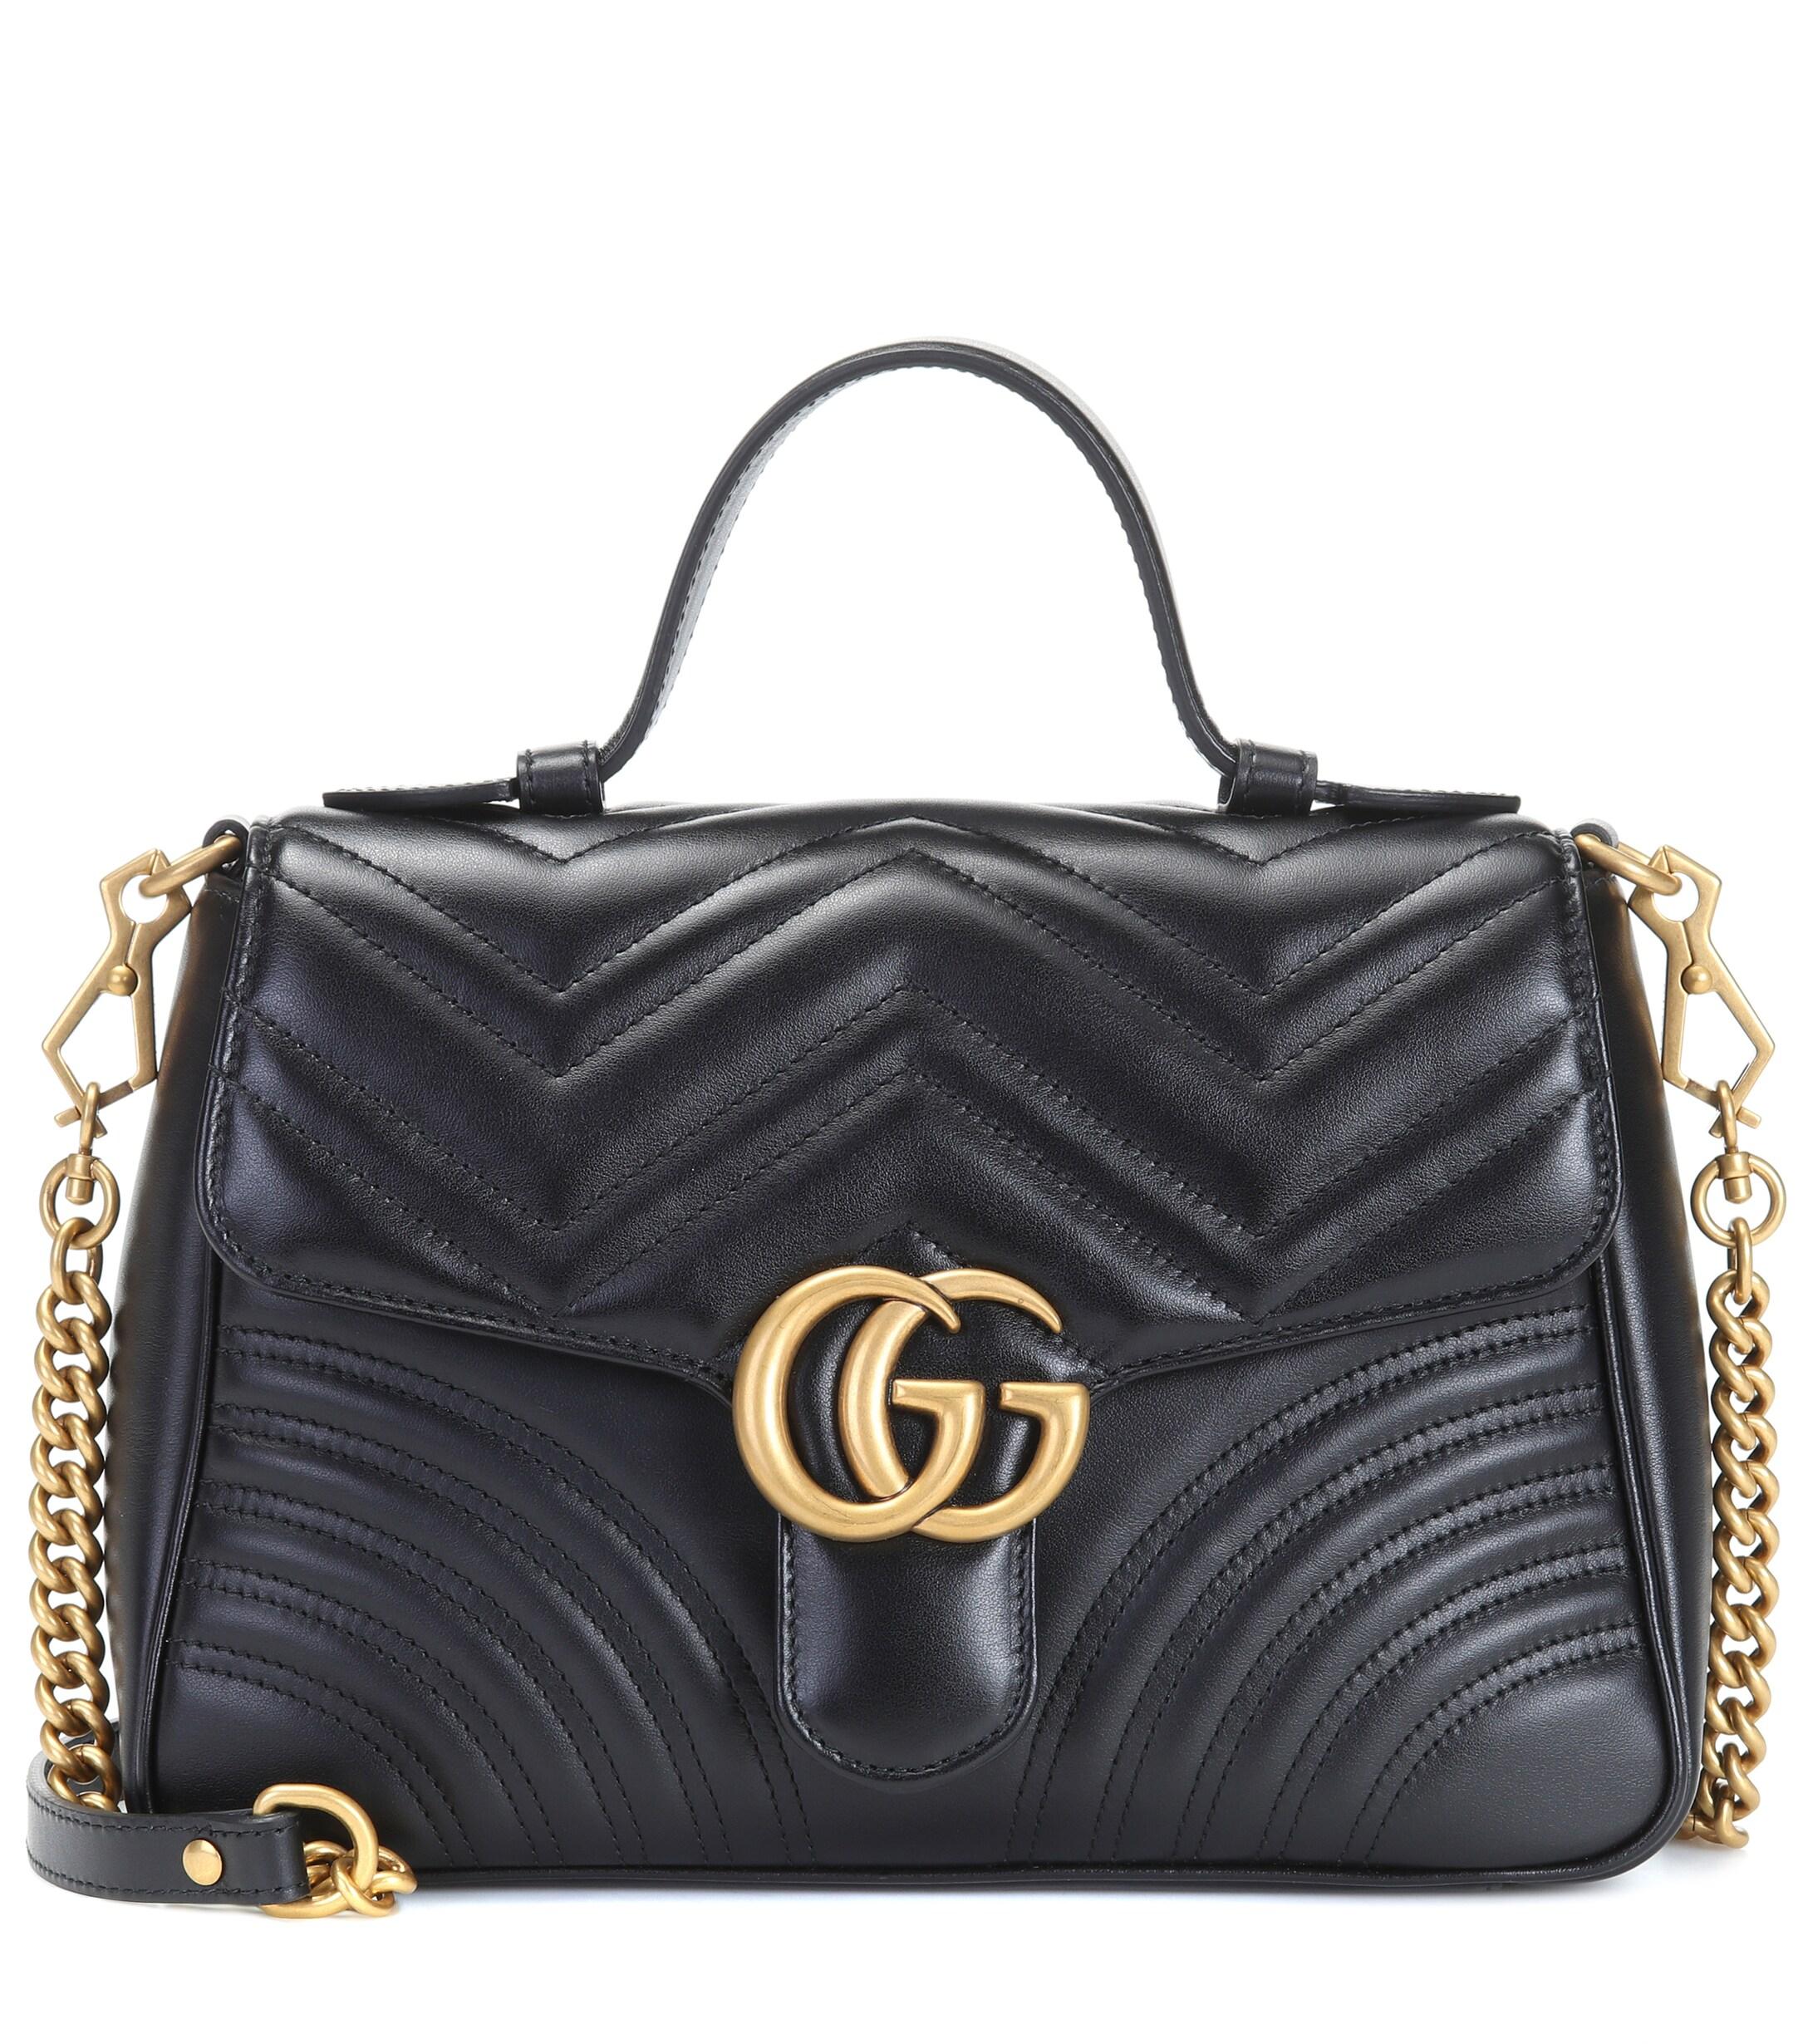 Gucci Gg Marmont Small Quilted Leather Shoulder Bag in Black - Save 29% - Lyst